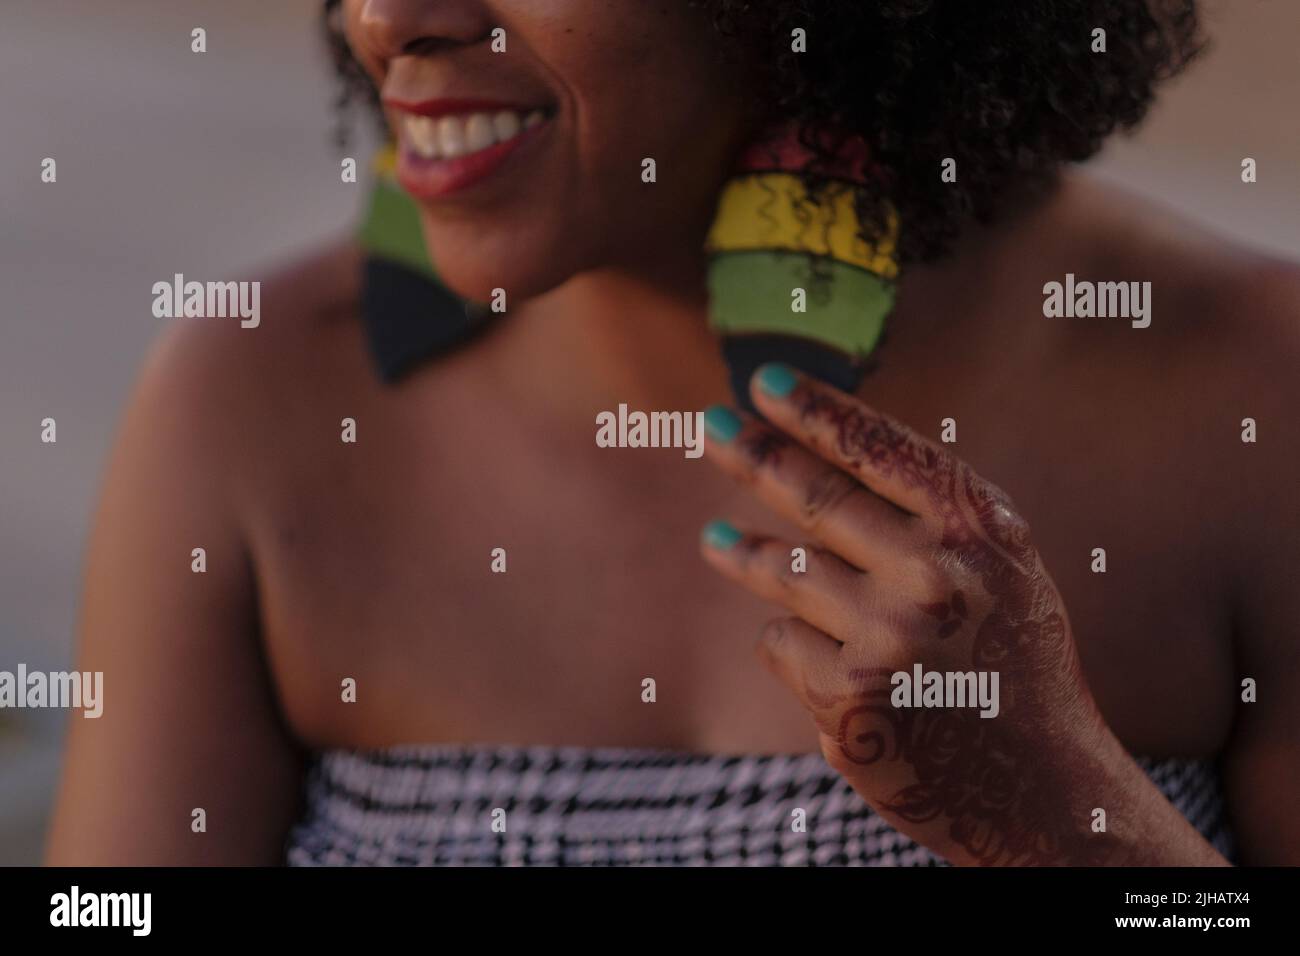 Smiling Black woman with afro hair holds big Rastafarian earring. Hand with henna tattoo and aqua nails. Houndstooth tube top. Close crop of face. Stock Photo